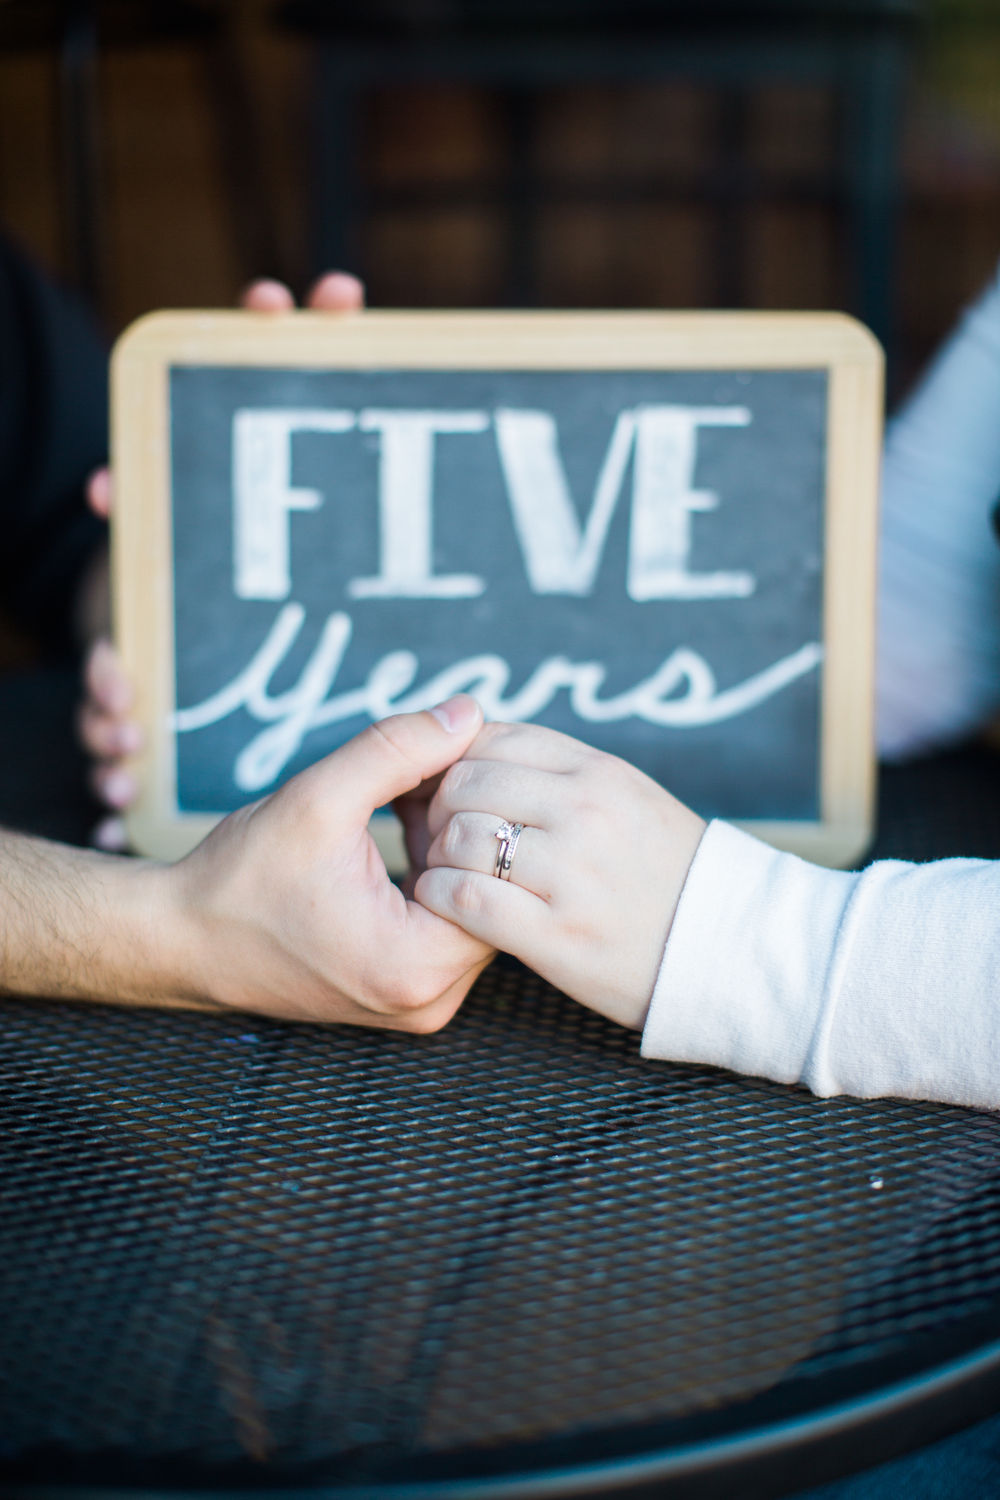 Five year sign with photo of wedding ring